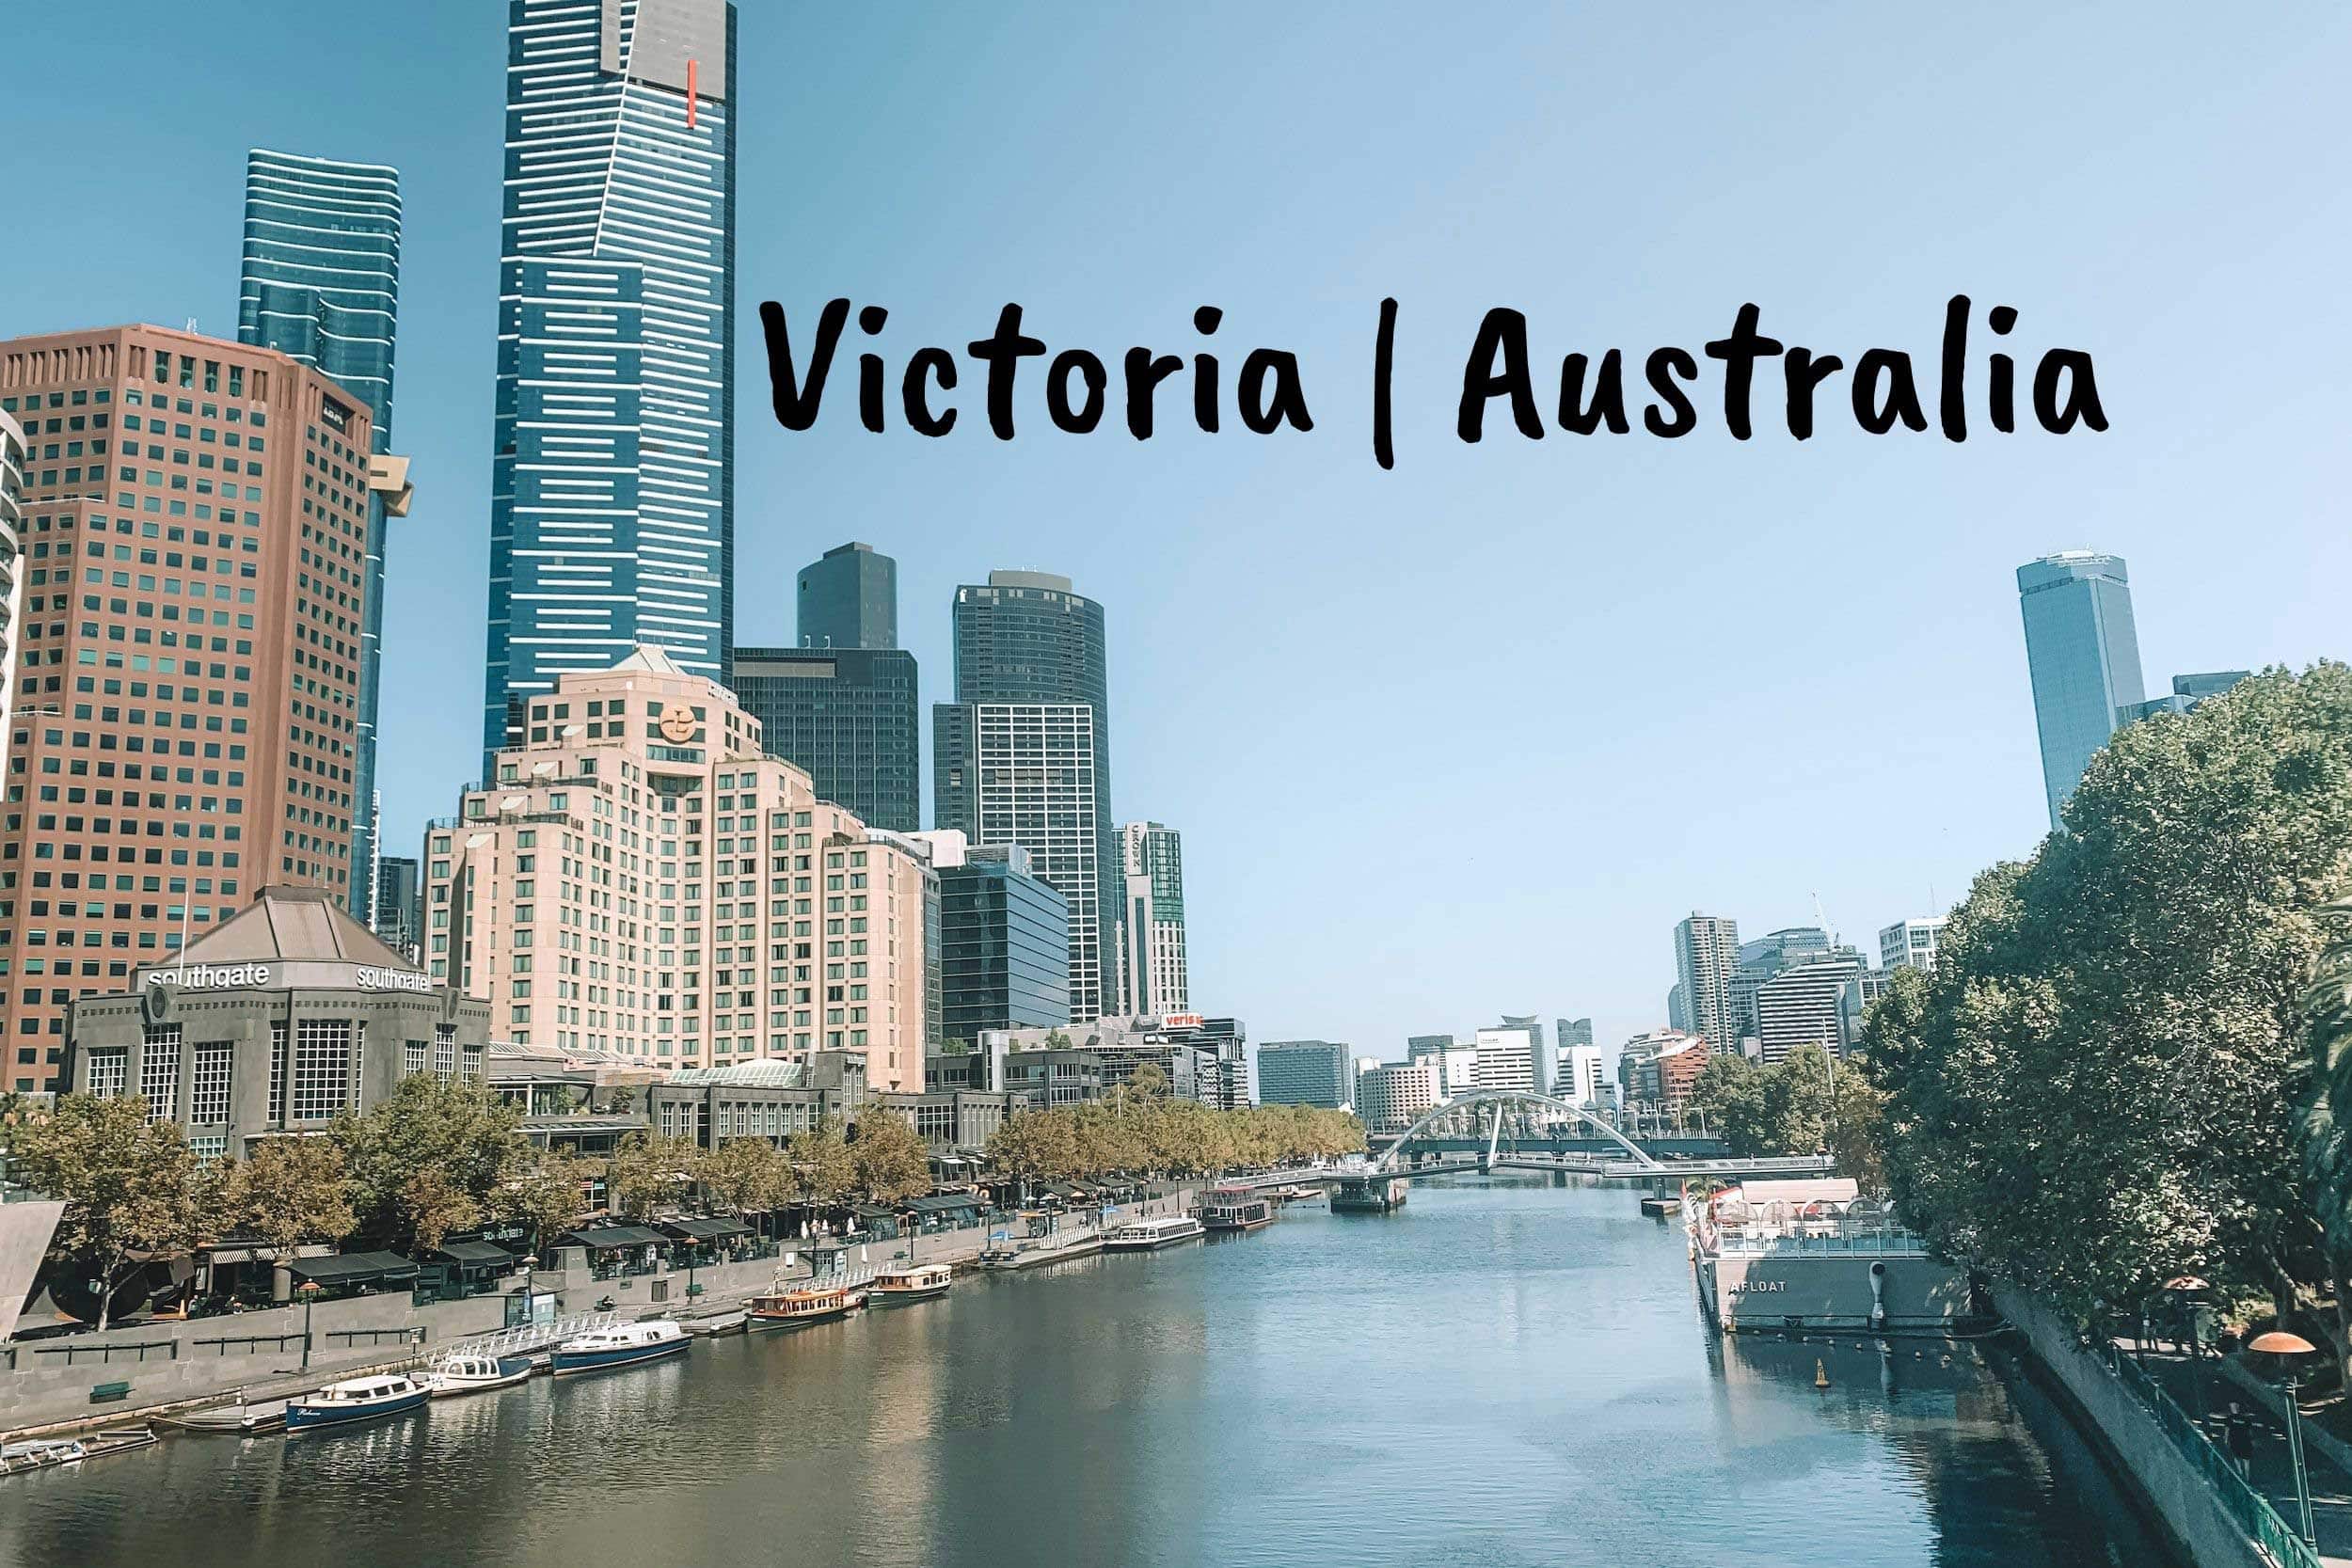 Melbourne CBD and the Yarra River on a sunny day / Places to visit in Victoria